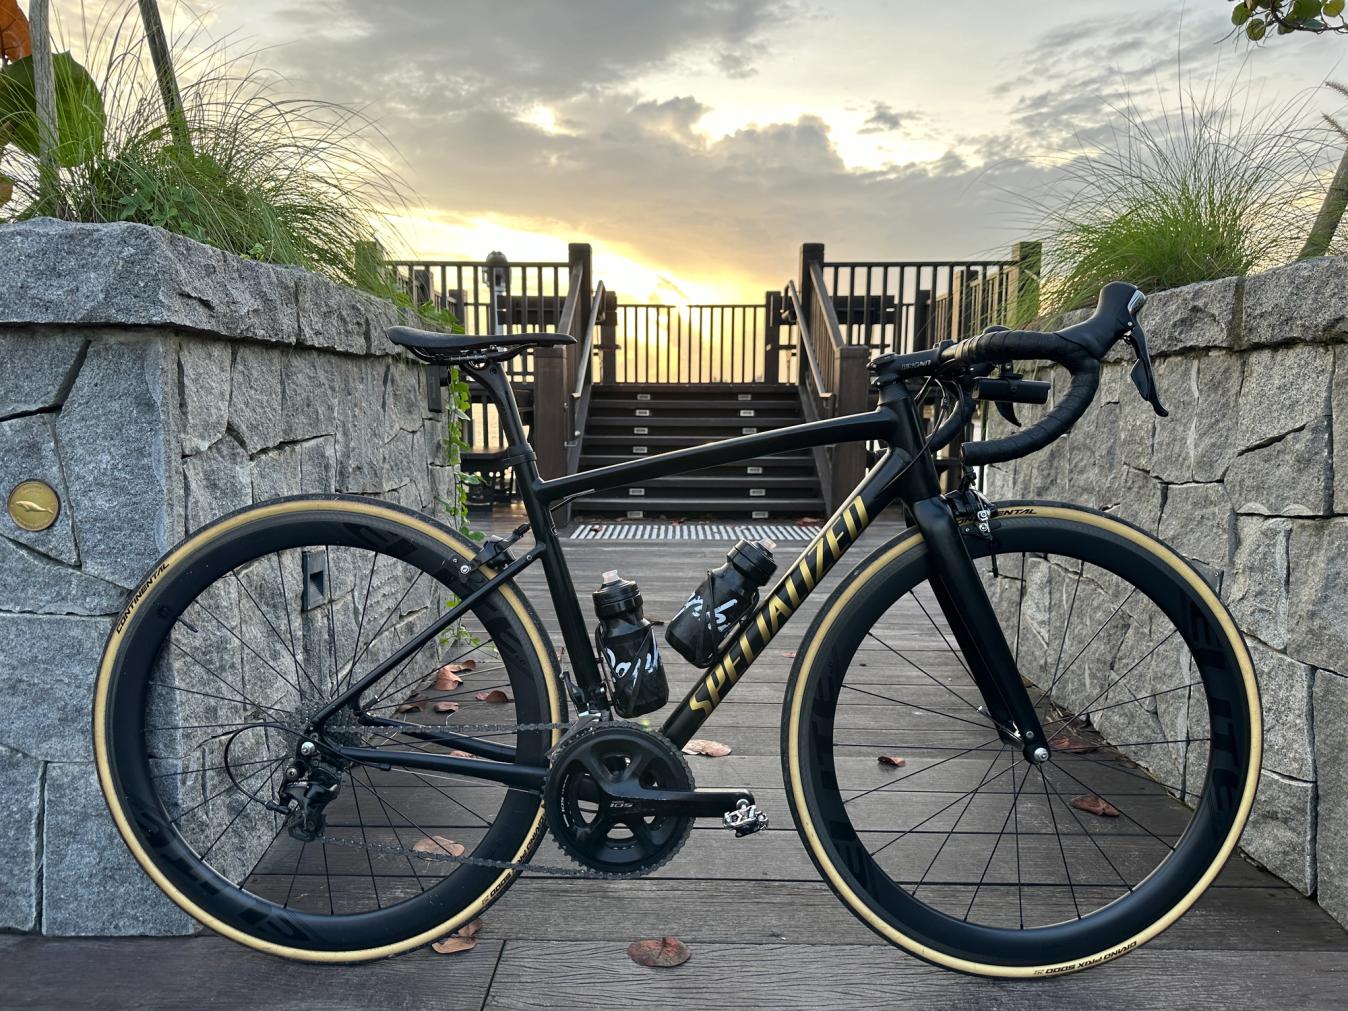 From the 1990s to a more modern bike in the form of a Specialized Allez. Great presentation and an amazing setting - this one gets a 'Supernice' from us